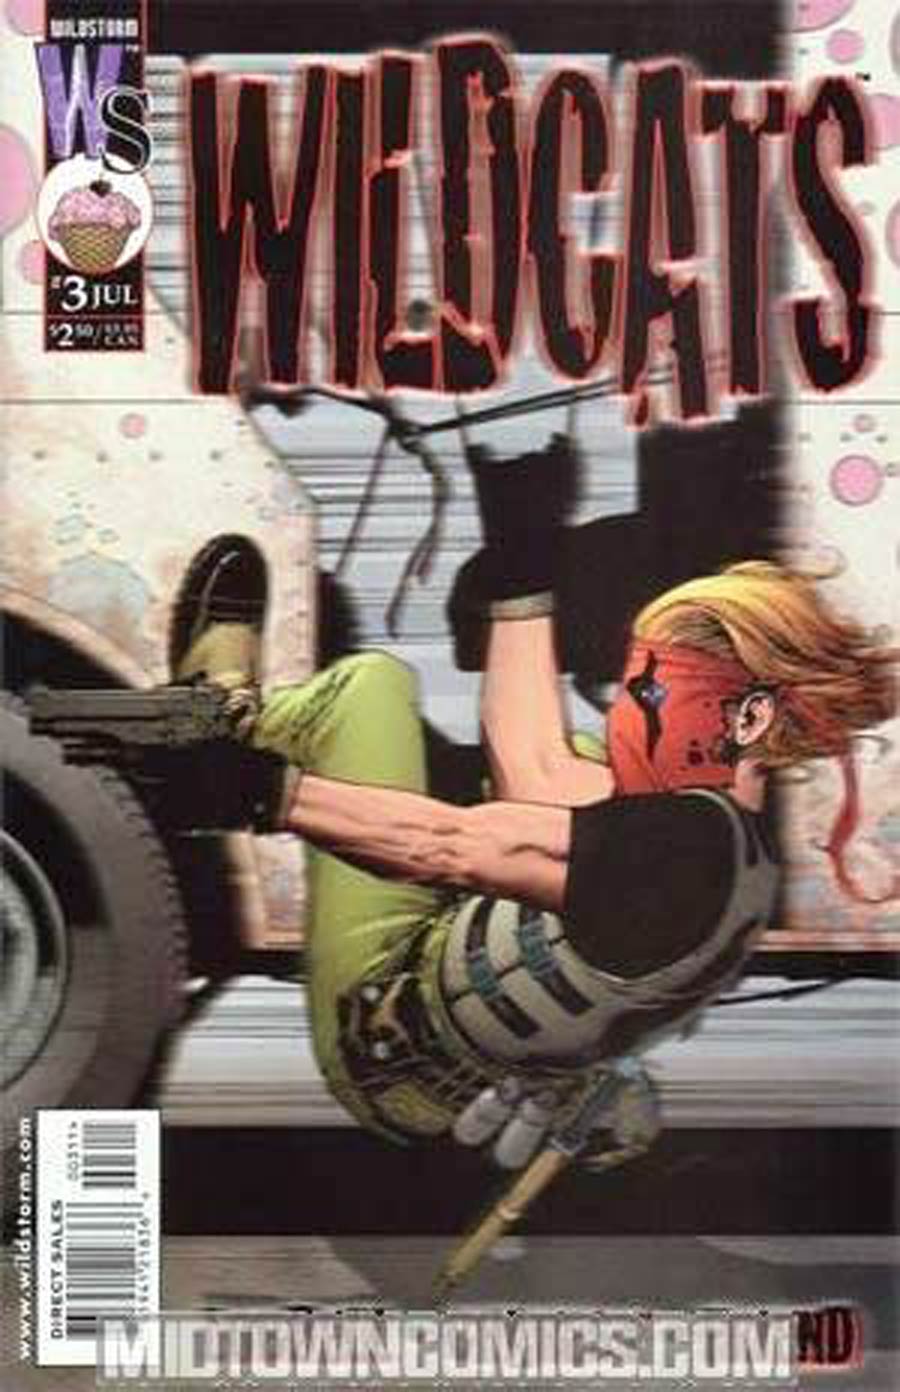 Wildcats Vol 2 #3 Cover A Travis Charest Cover